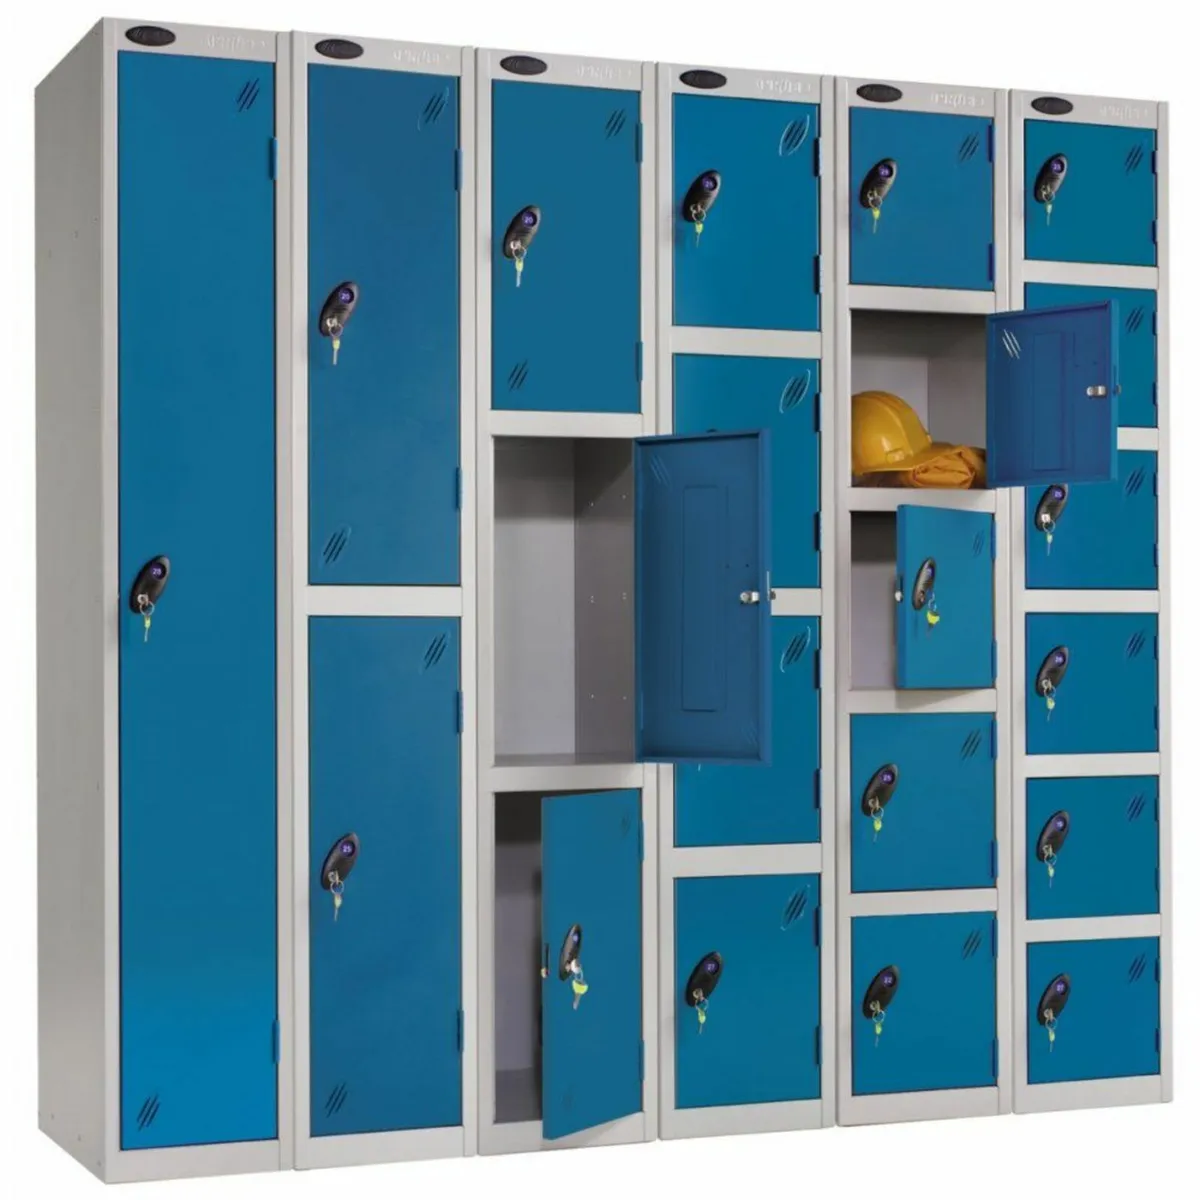 New Probe Lockers for sale - Image 1